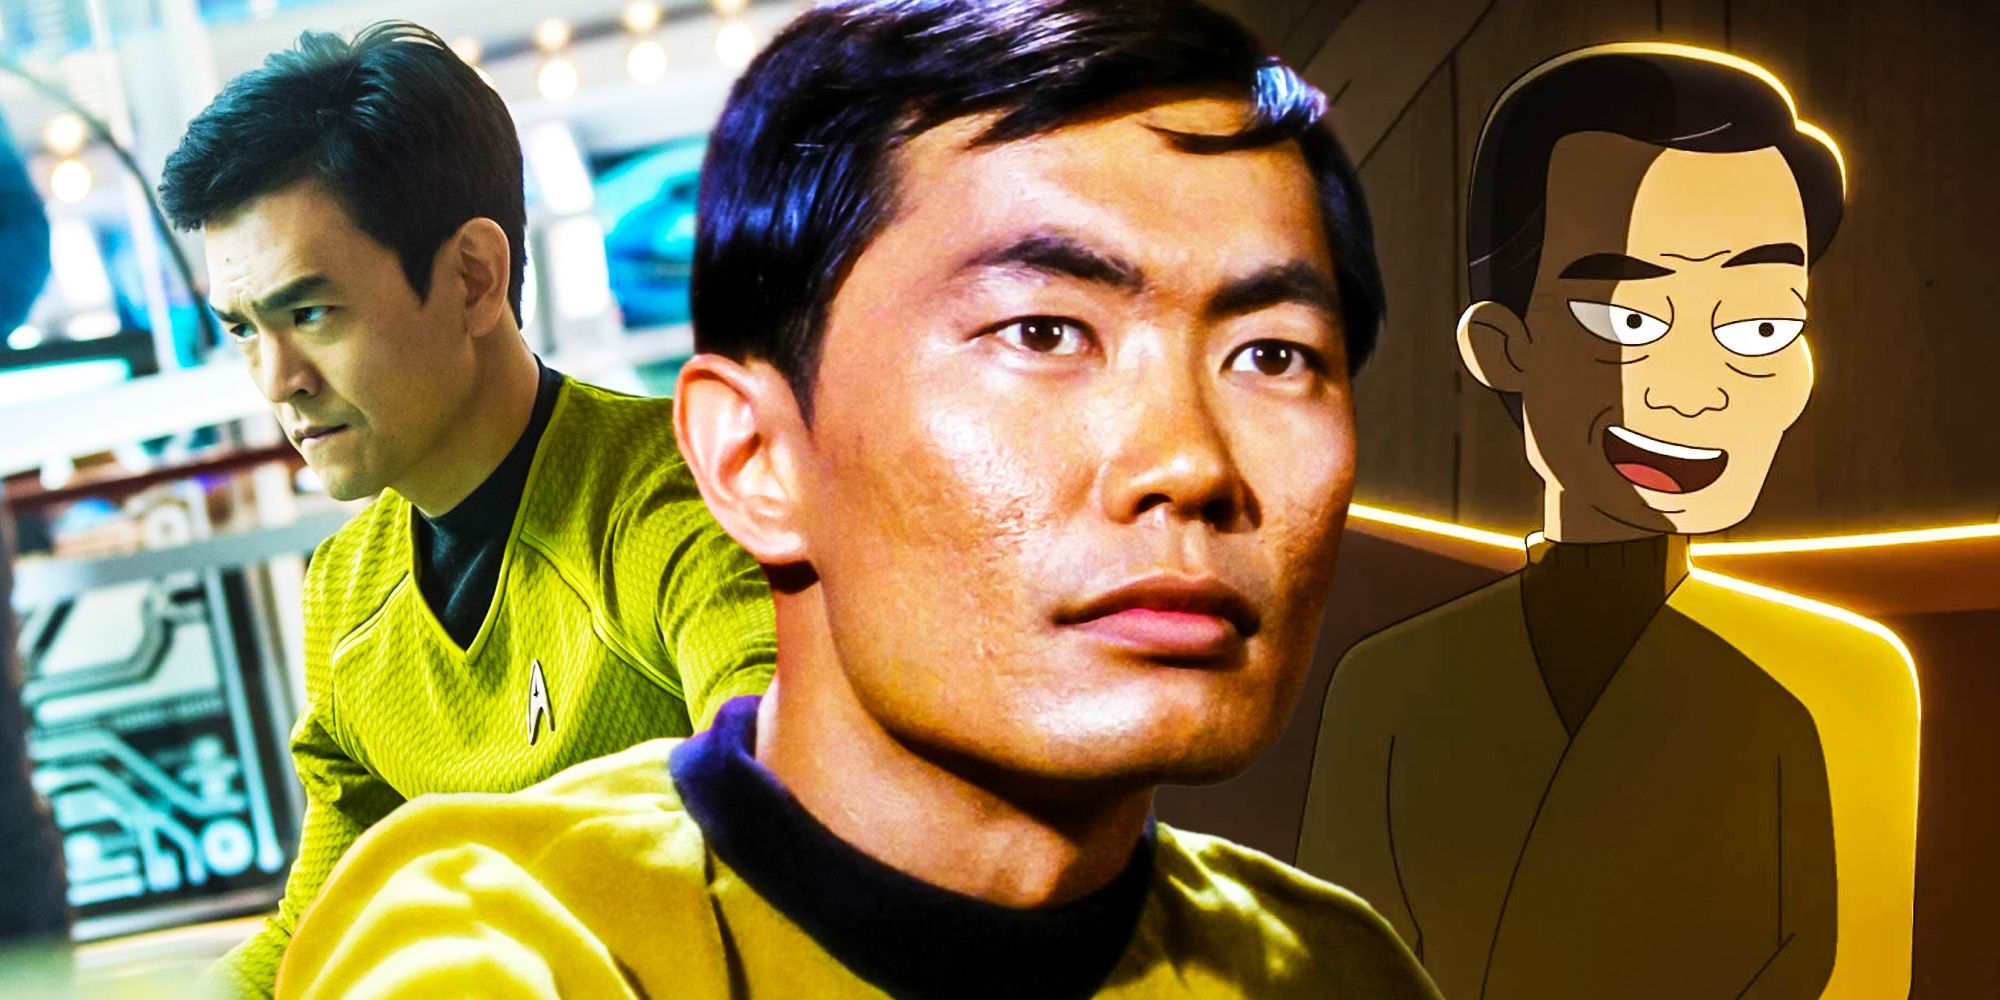 star trek colleague of sulu and spock